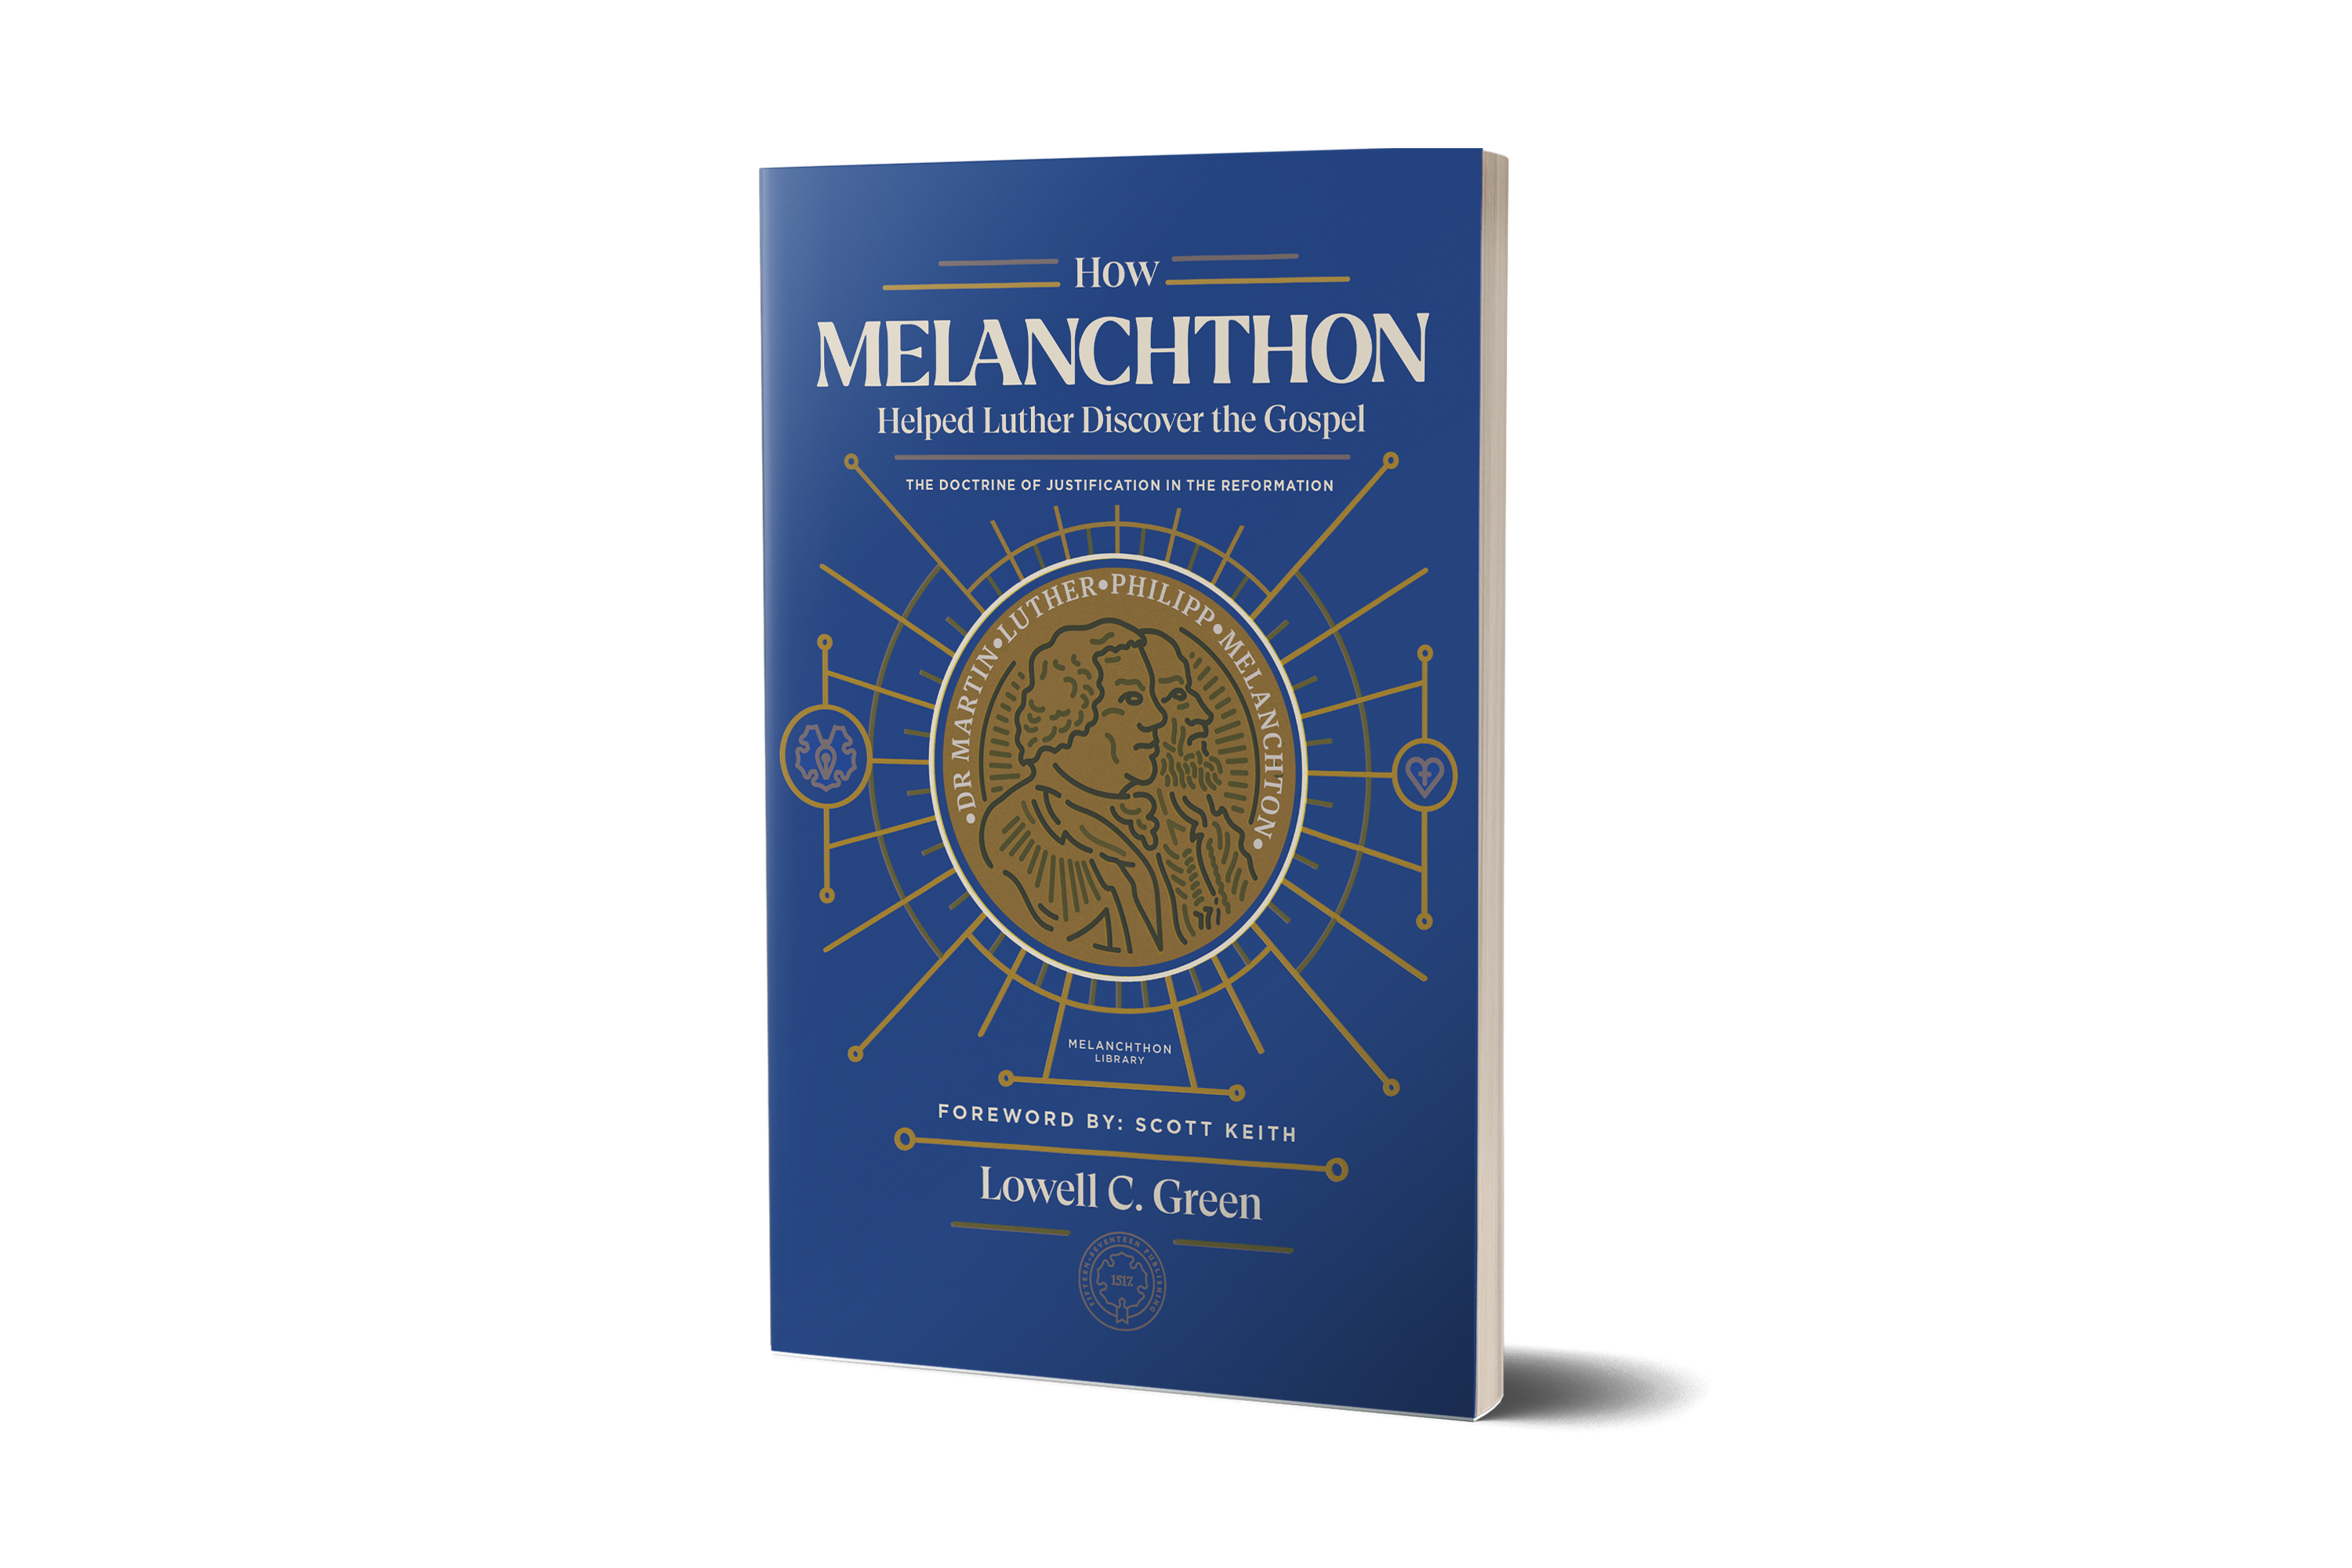 How Melanchthon Helped-Book-Small-Spine-Mockup-no bg (3)